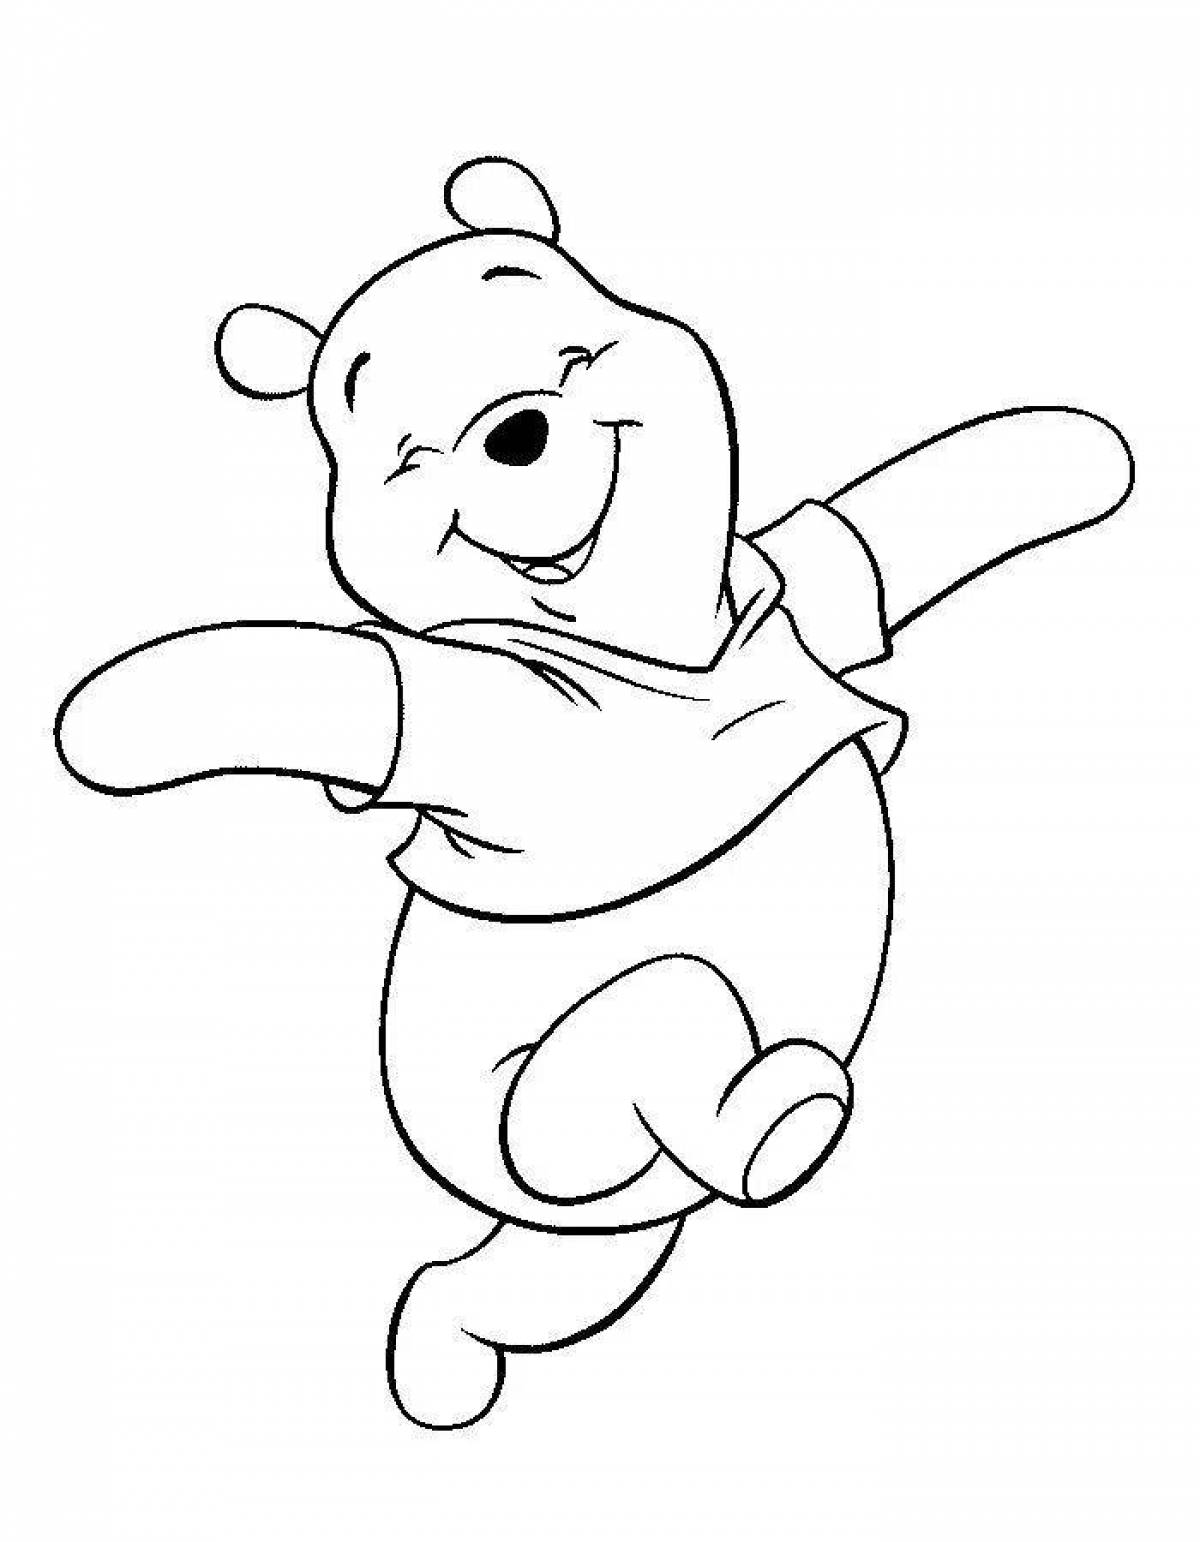 Winnie the pooh amazing coloring book for kids